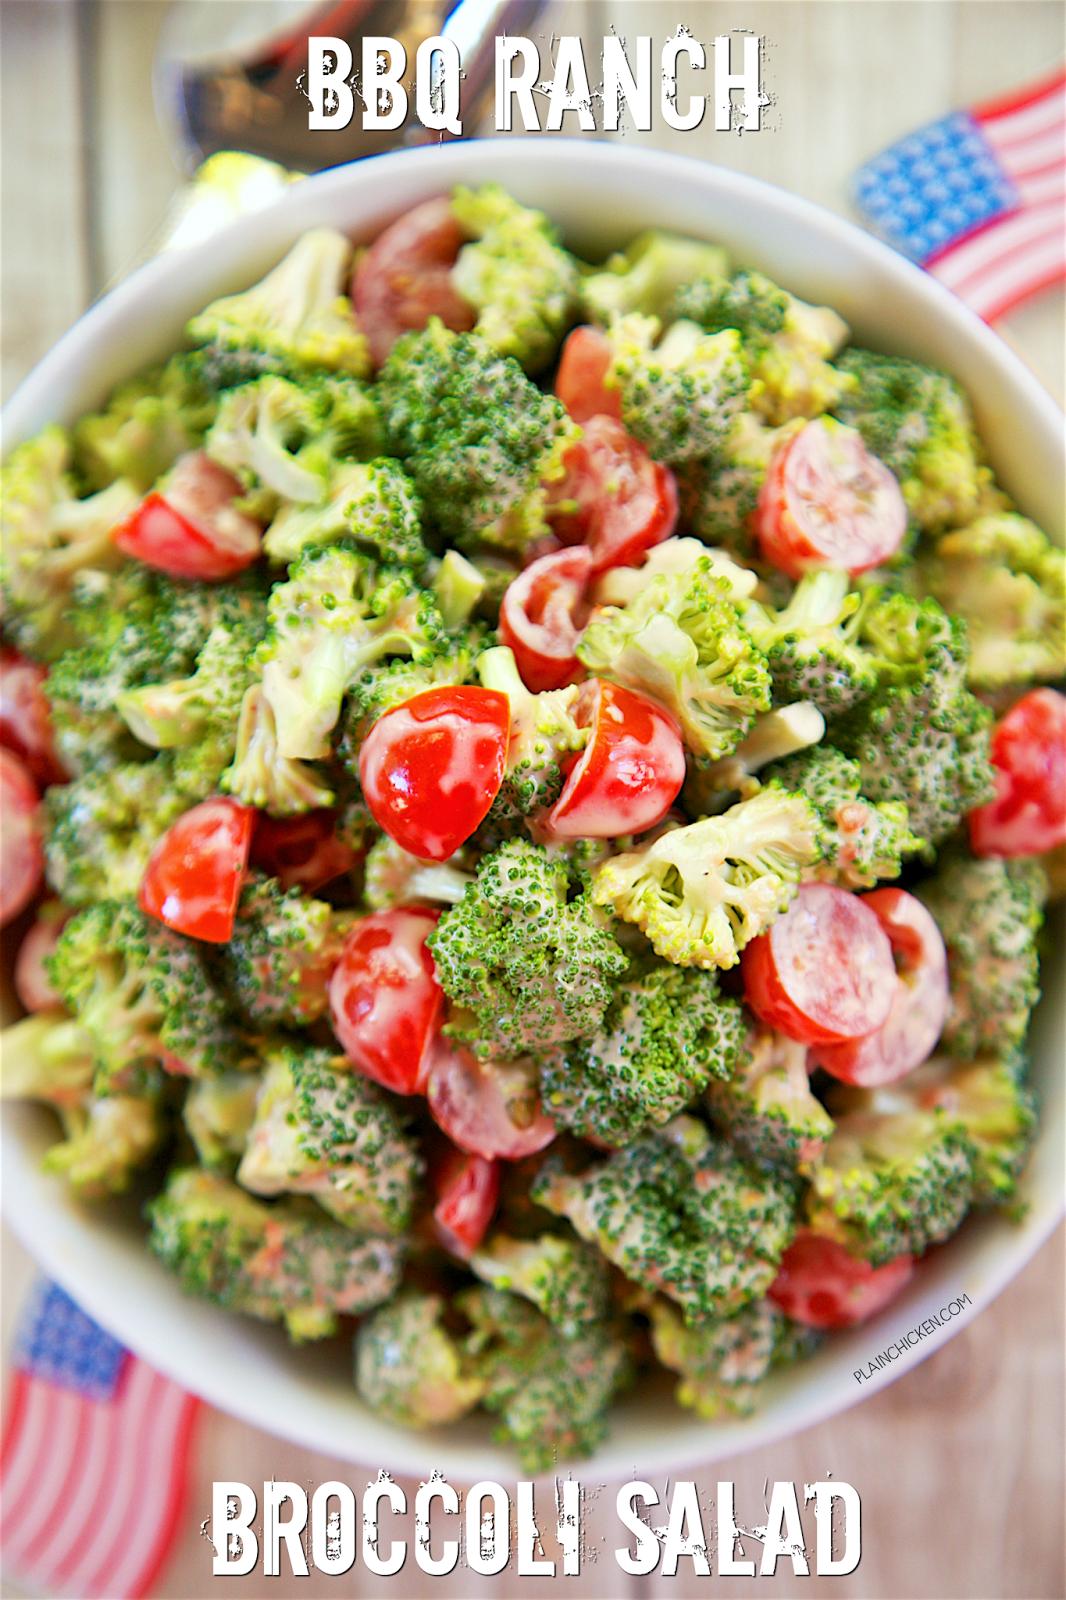 BBQ Ranch Broccoli Salad - only 3 ingredients! Everyone RAVES about this crazy simple side dish!! We ate this 2 days in a row. Great for cookouts!